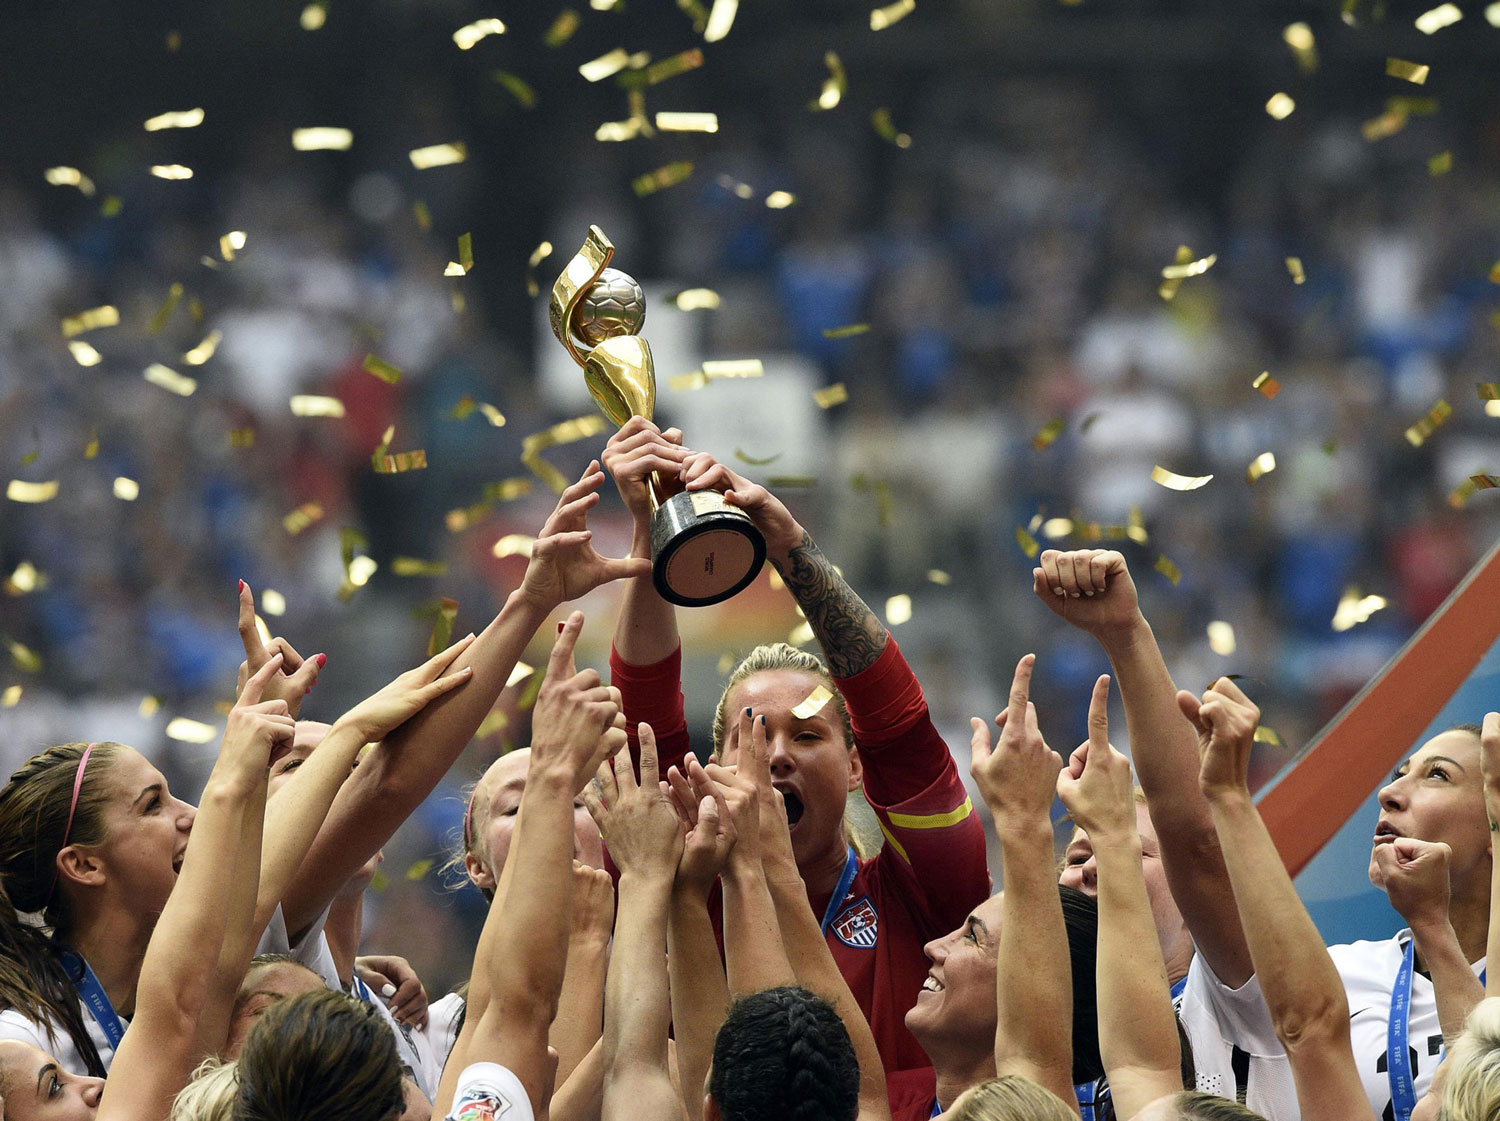 FIVE lessons from the FIFA Women's World Cup that will enhance your